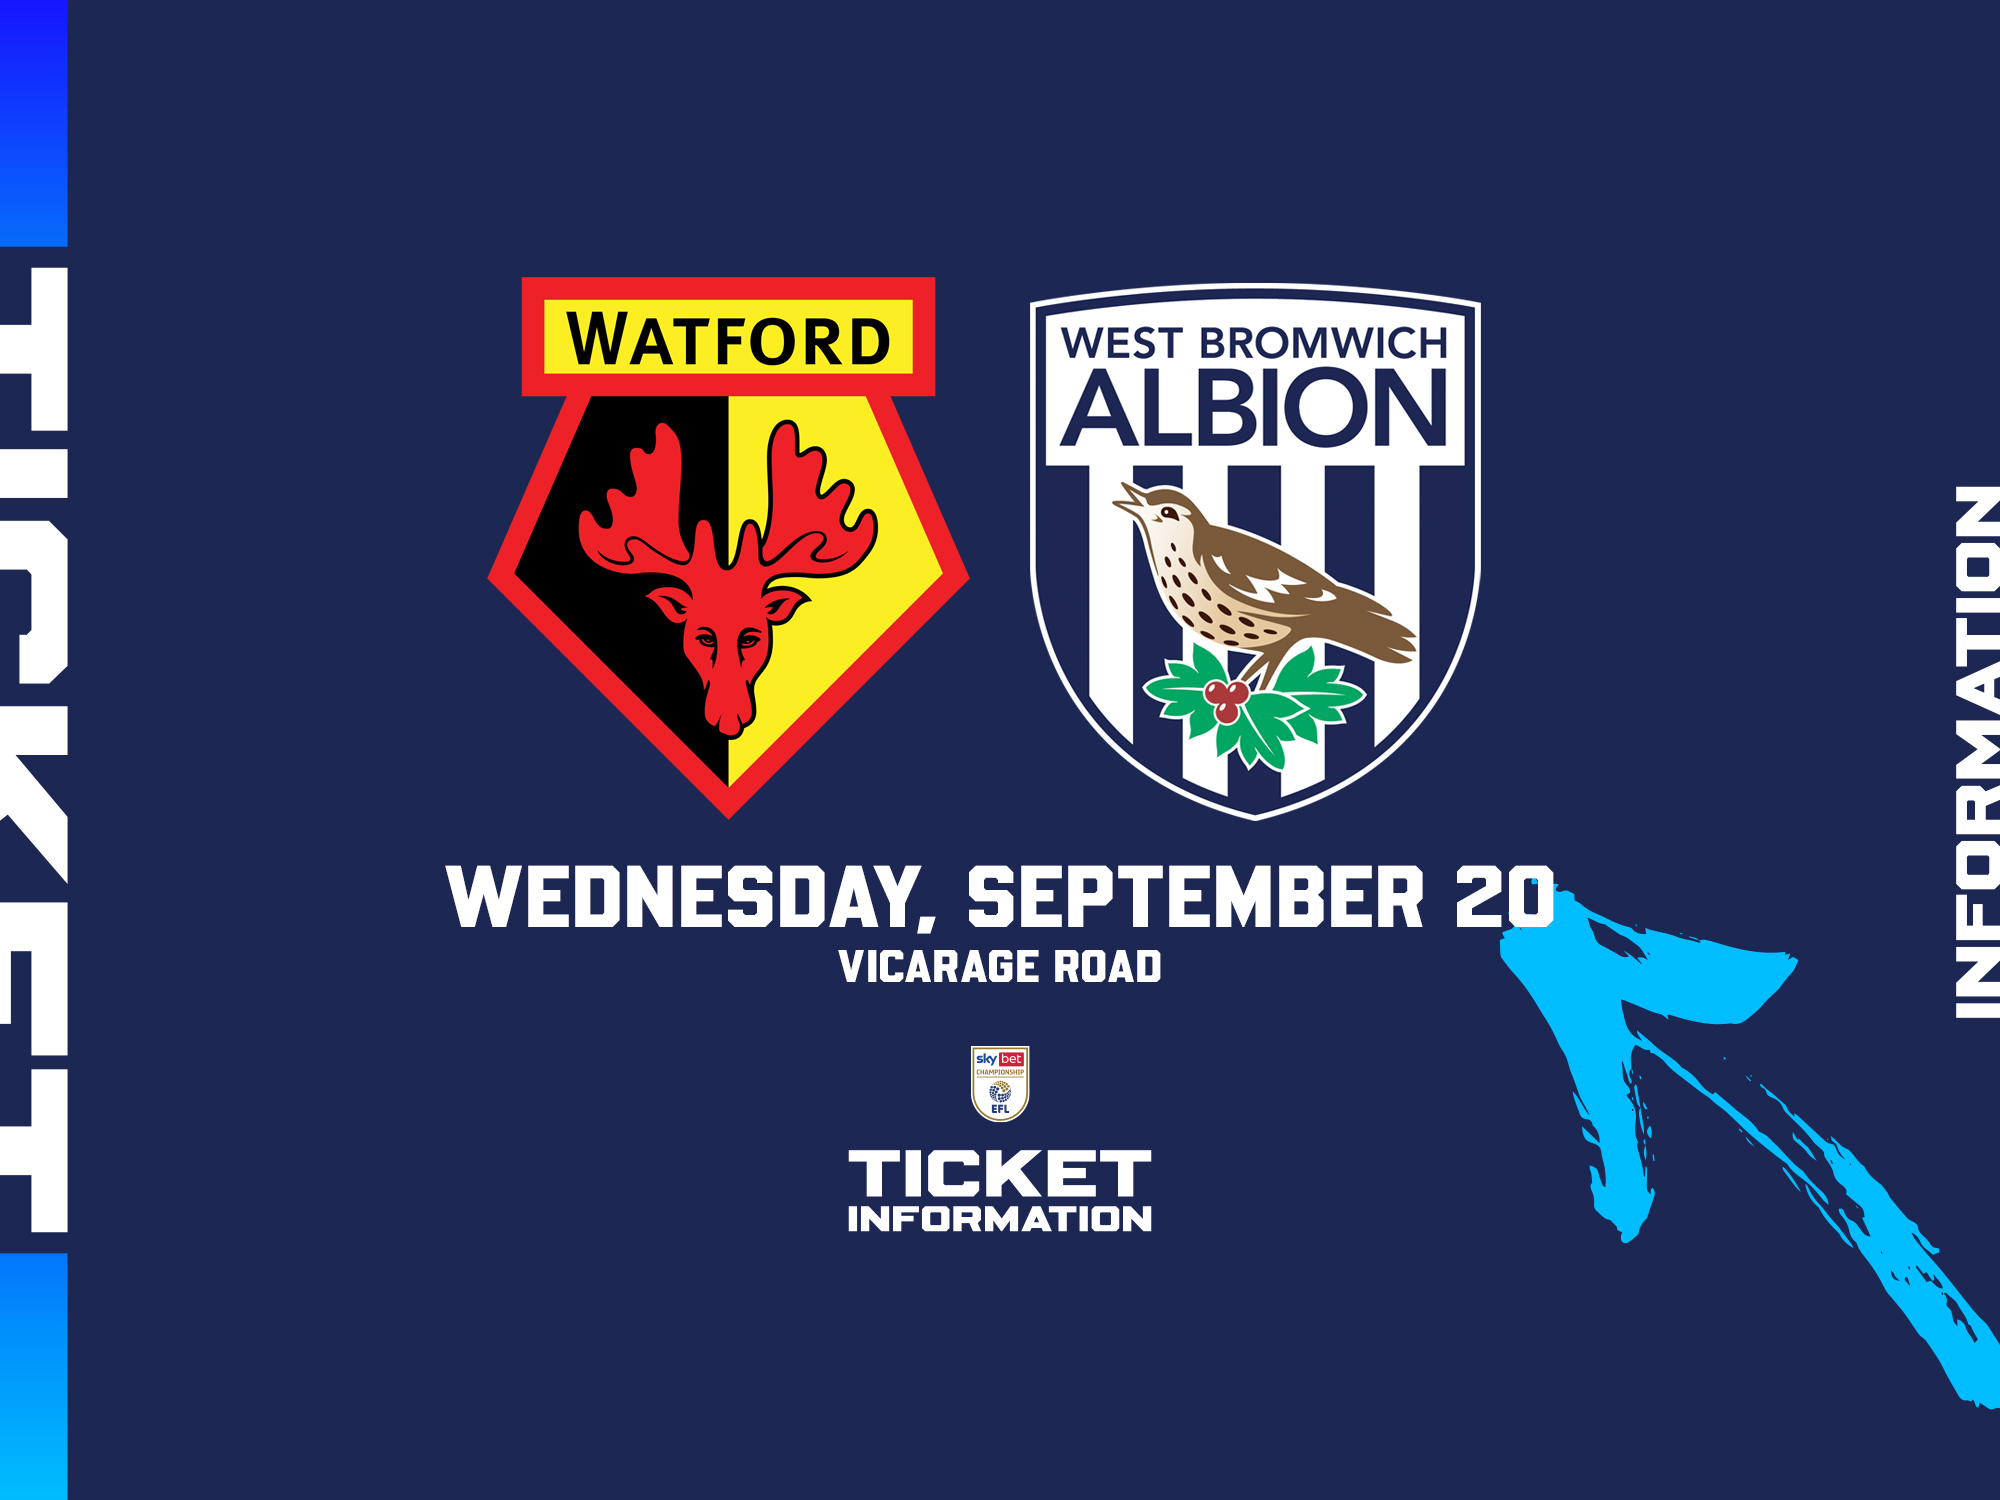 A ticket graphic displaying information for Albion's game at Watford